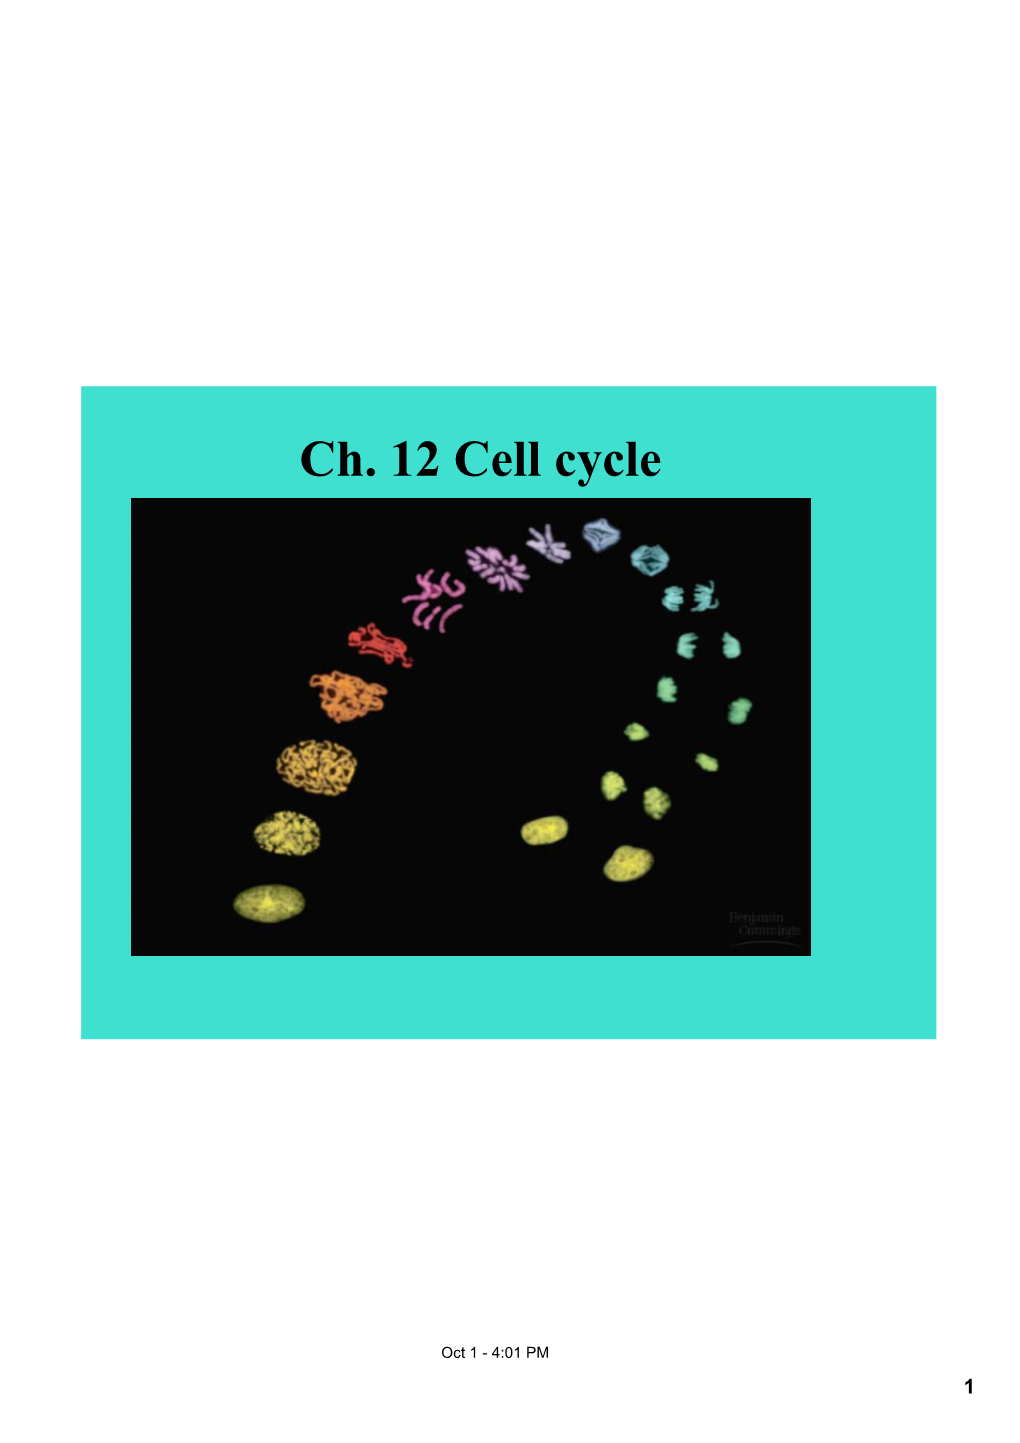 Ch. 12 Cell Cycle